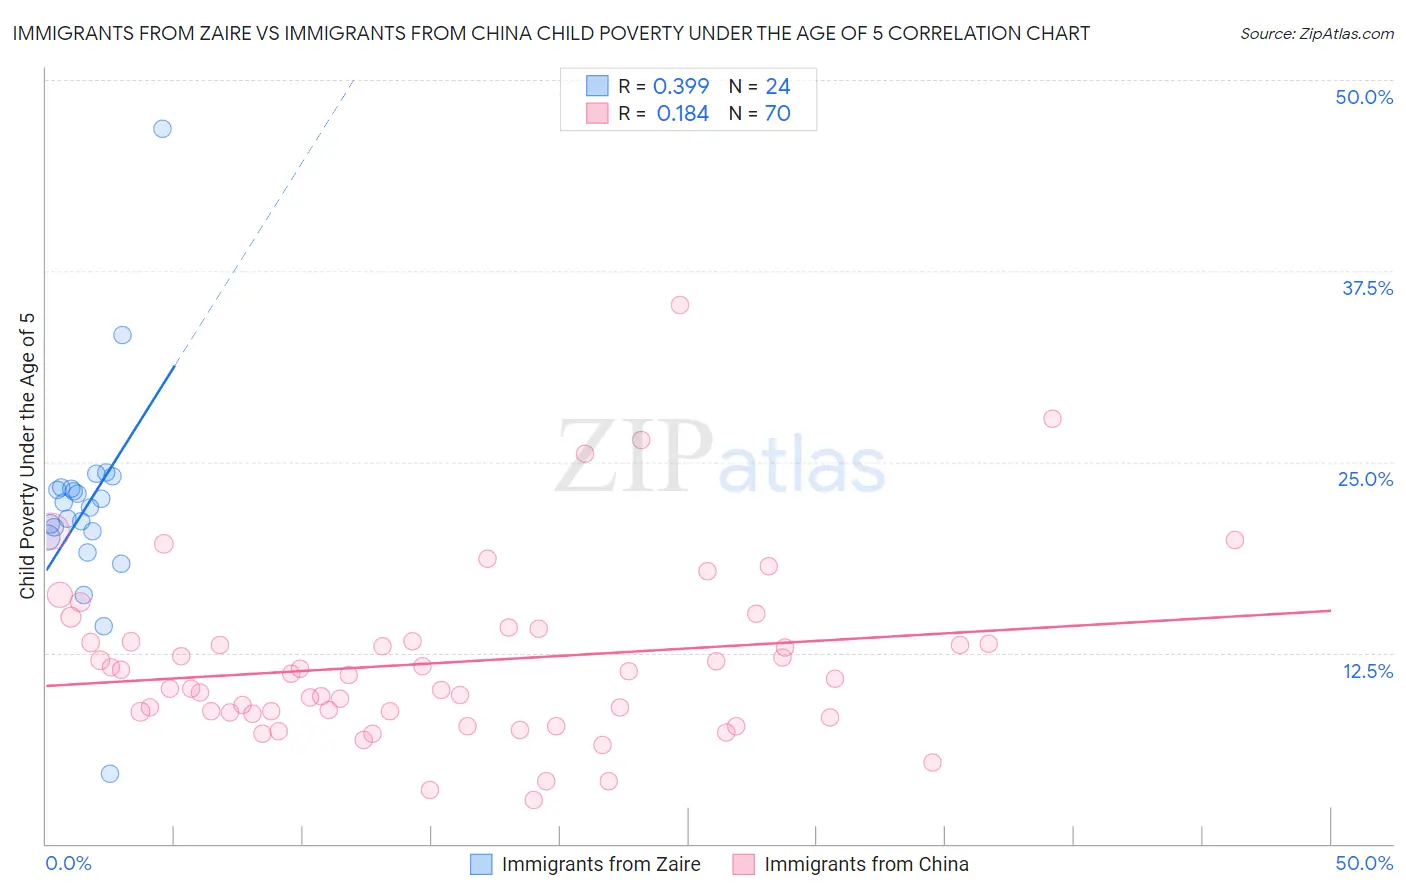 Immigrants from Zaire vs Immigrants from China Child Poverty Under the Age of 5